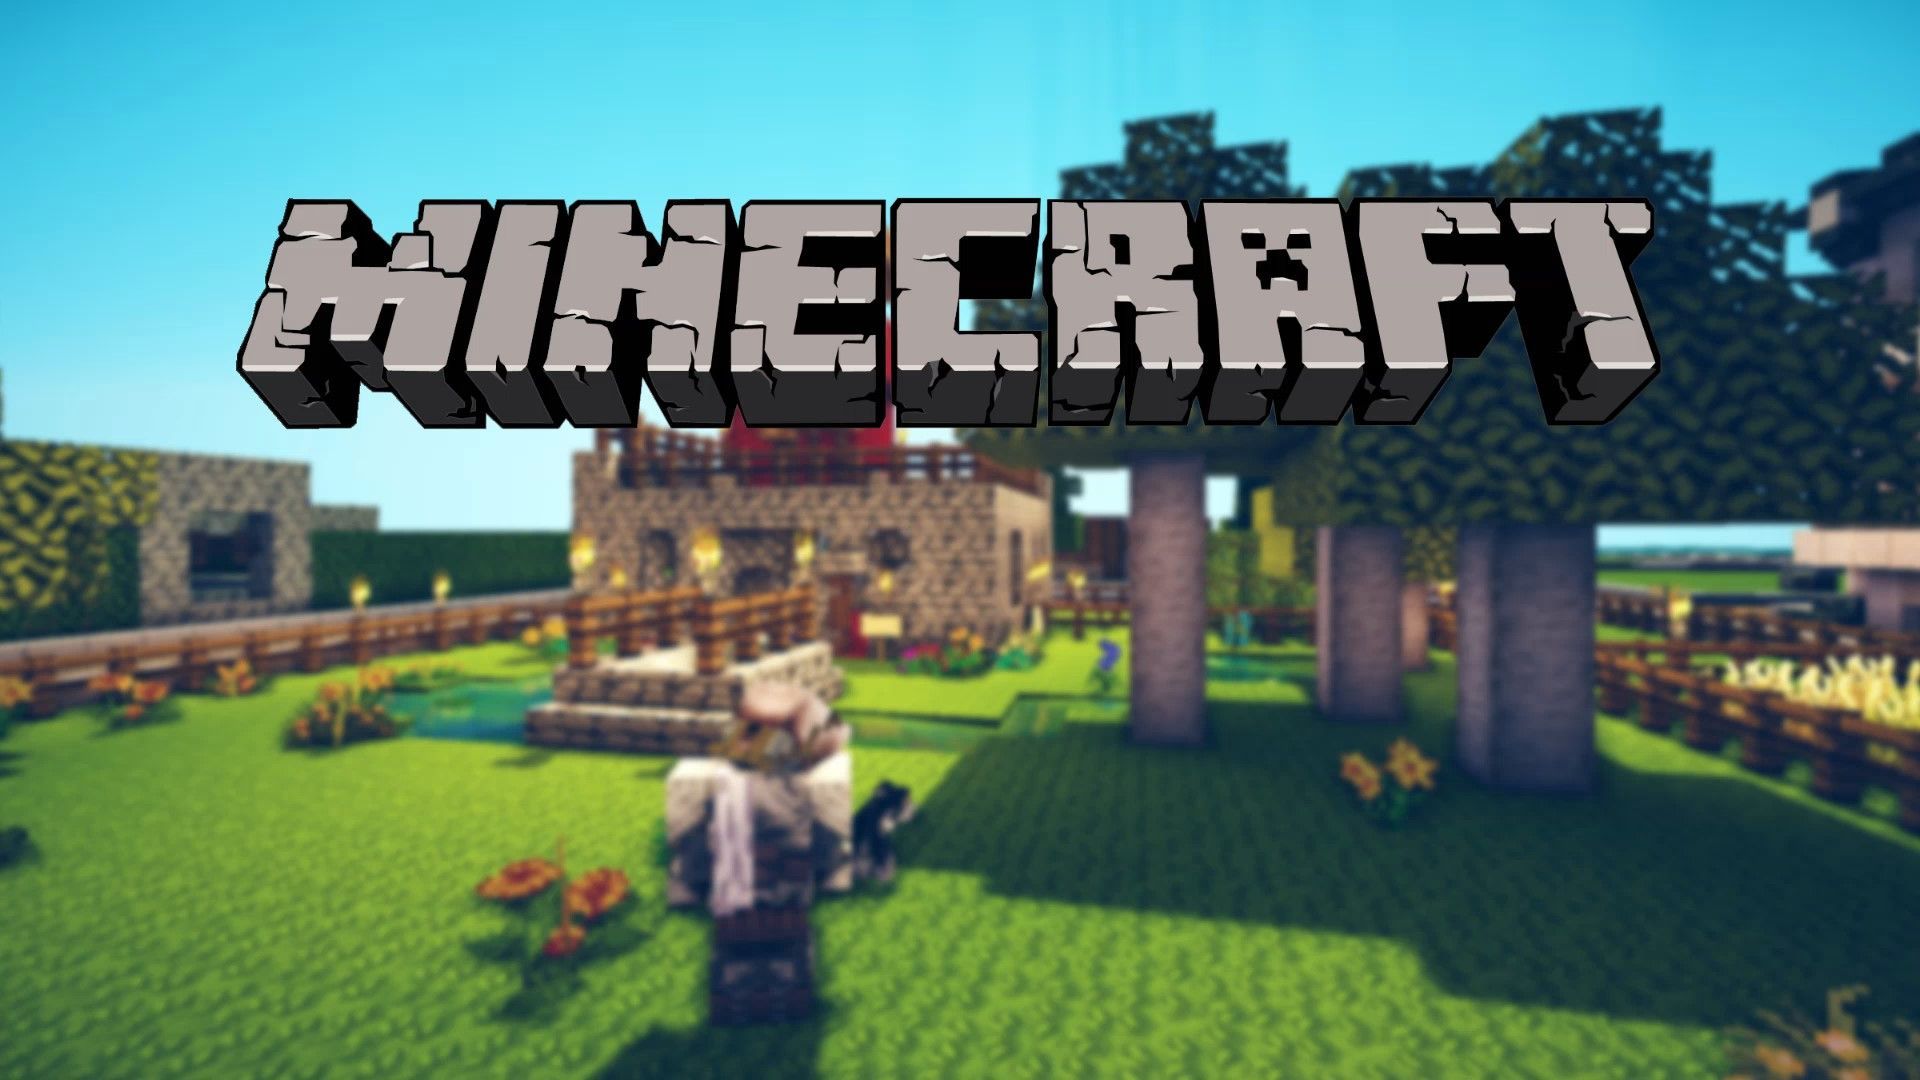 Minecraft 1.8.1 now available for download, lots of bug fixes